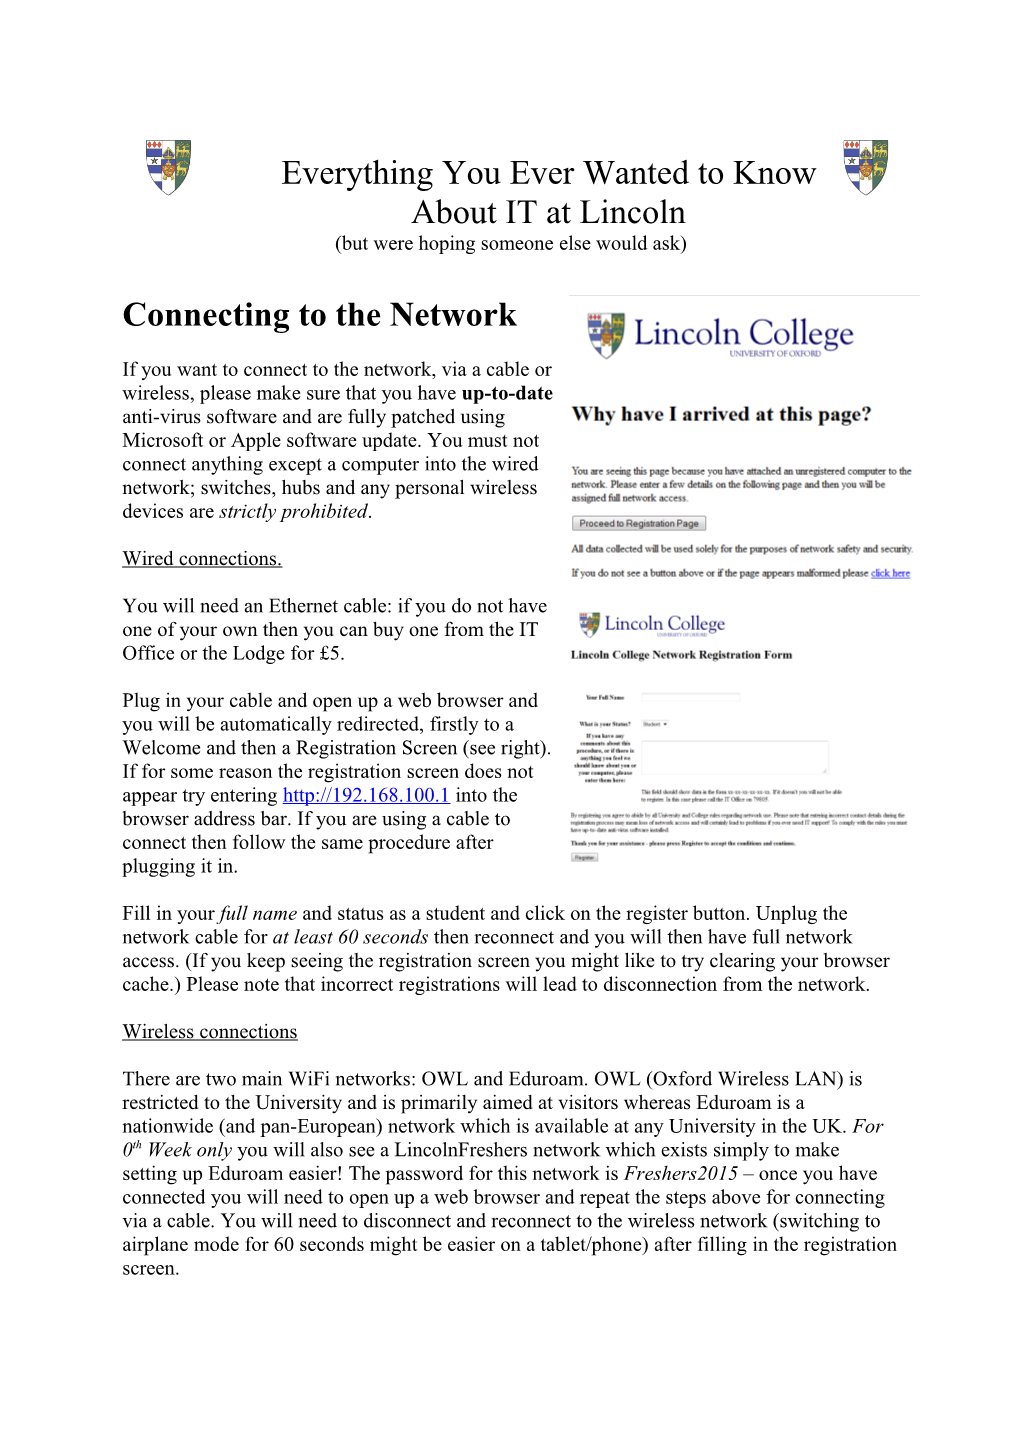 Use of Network for Admissions Visitors